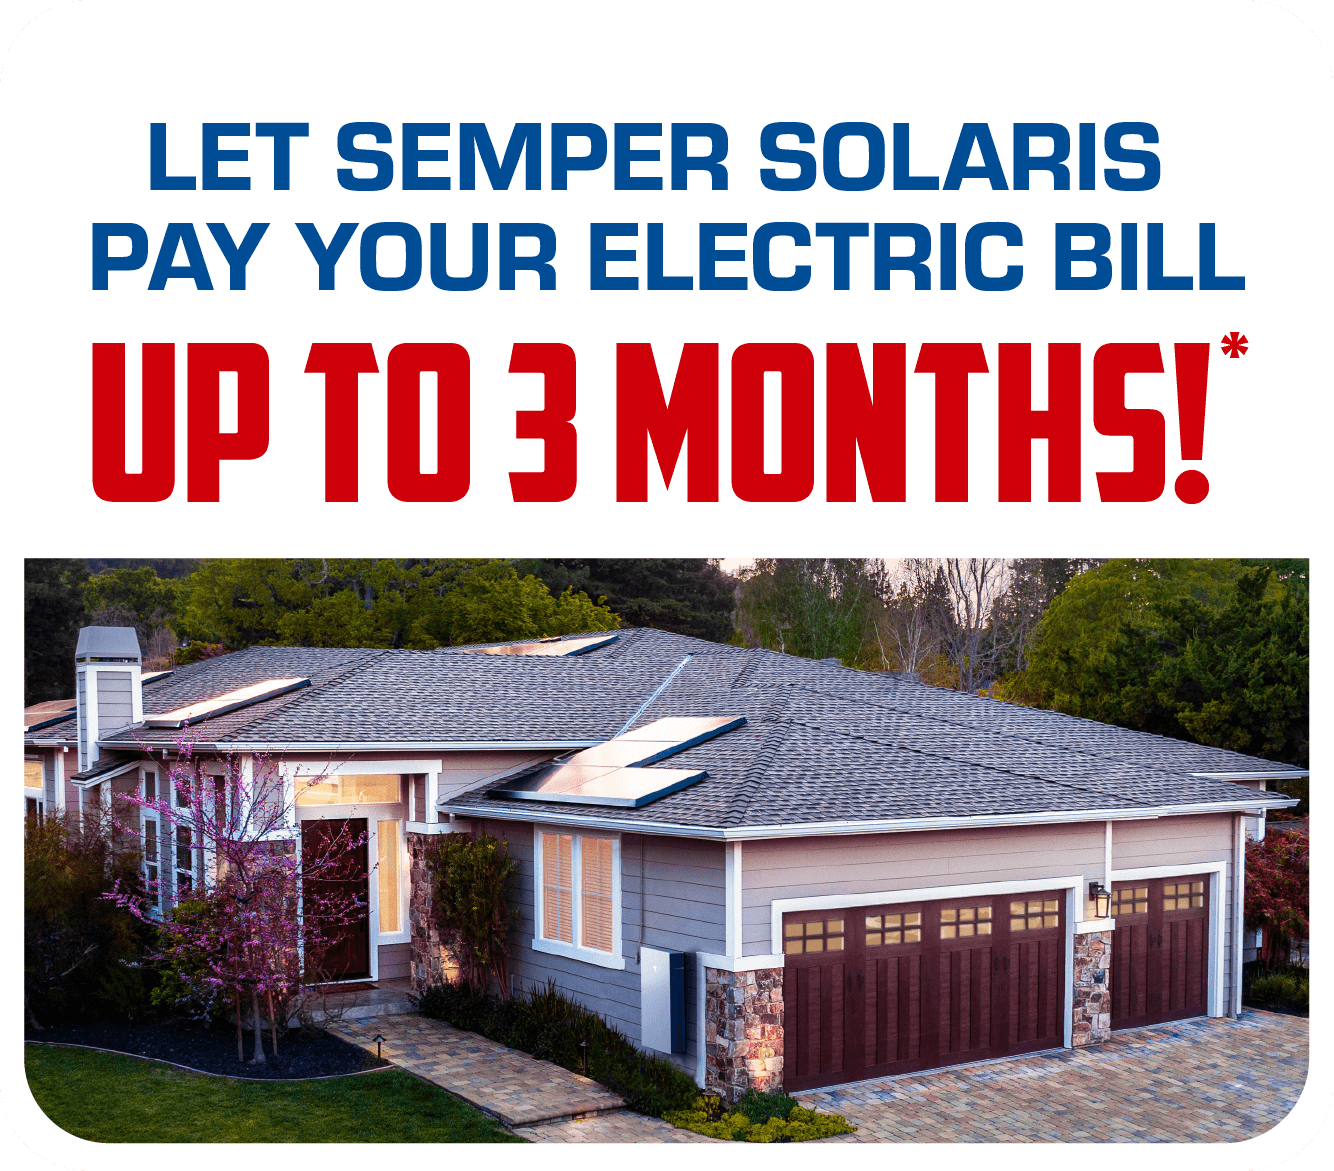 We pay your electric bill for up to 3 months, go solar + battery storage